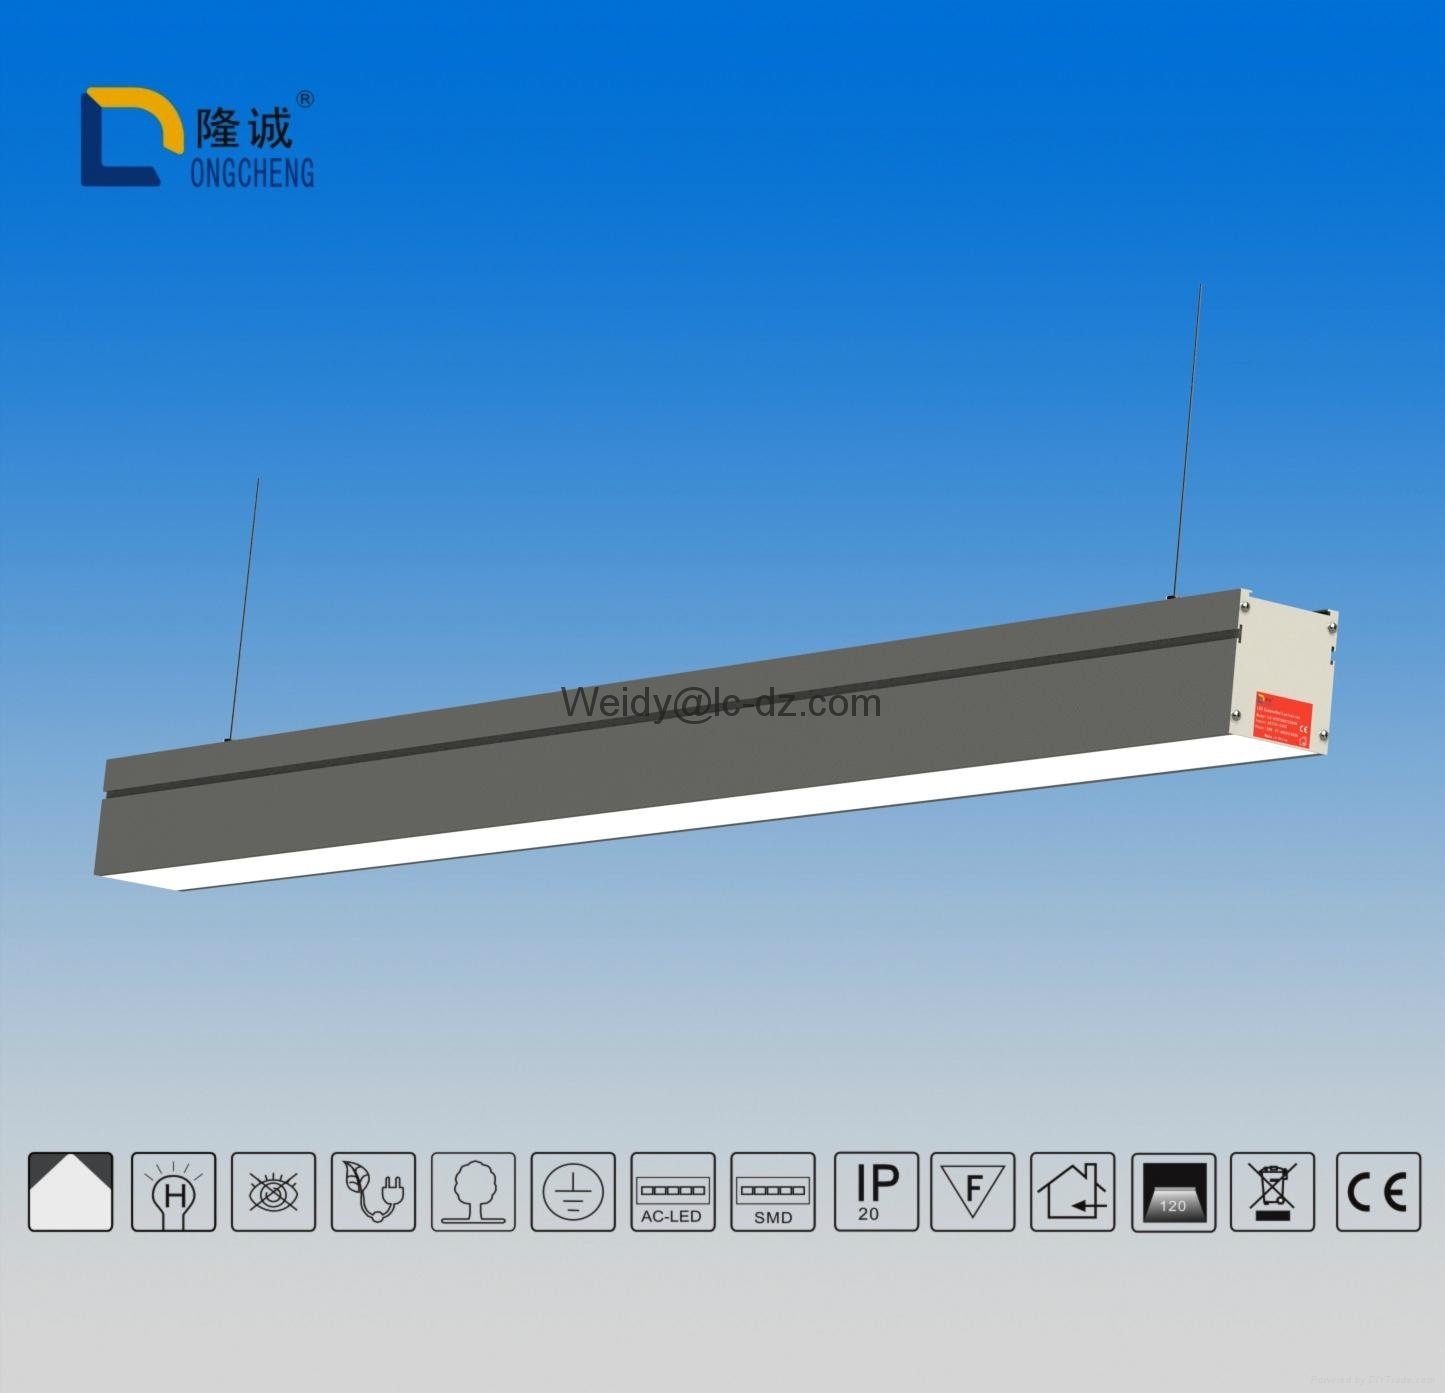 SMD chip DALI dimming system for linear office lamps 3